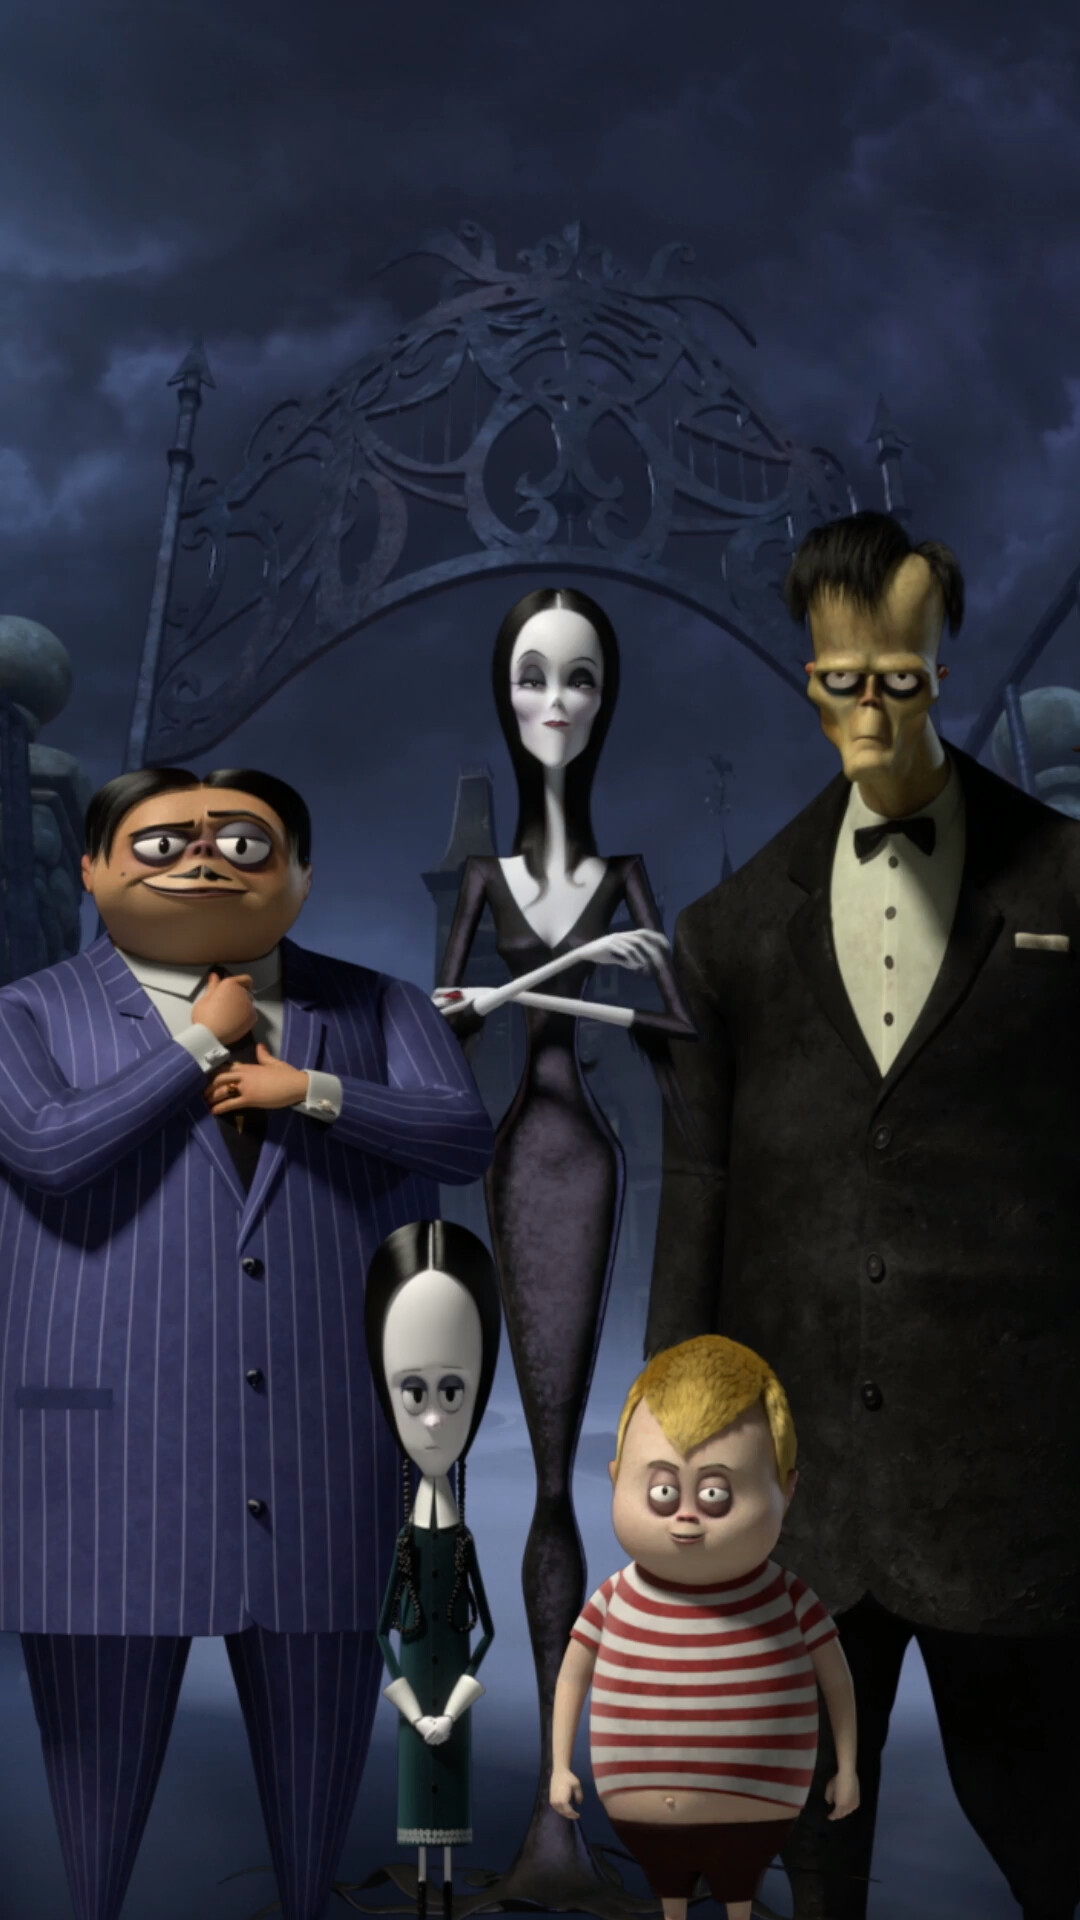 The Addams Family 2: Fictional characters from dark comedy franchise, Wednesday, Pugsley. 1080x1920 Full HD Wallpaper.